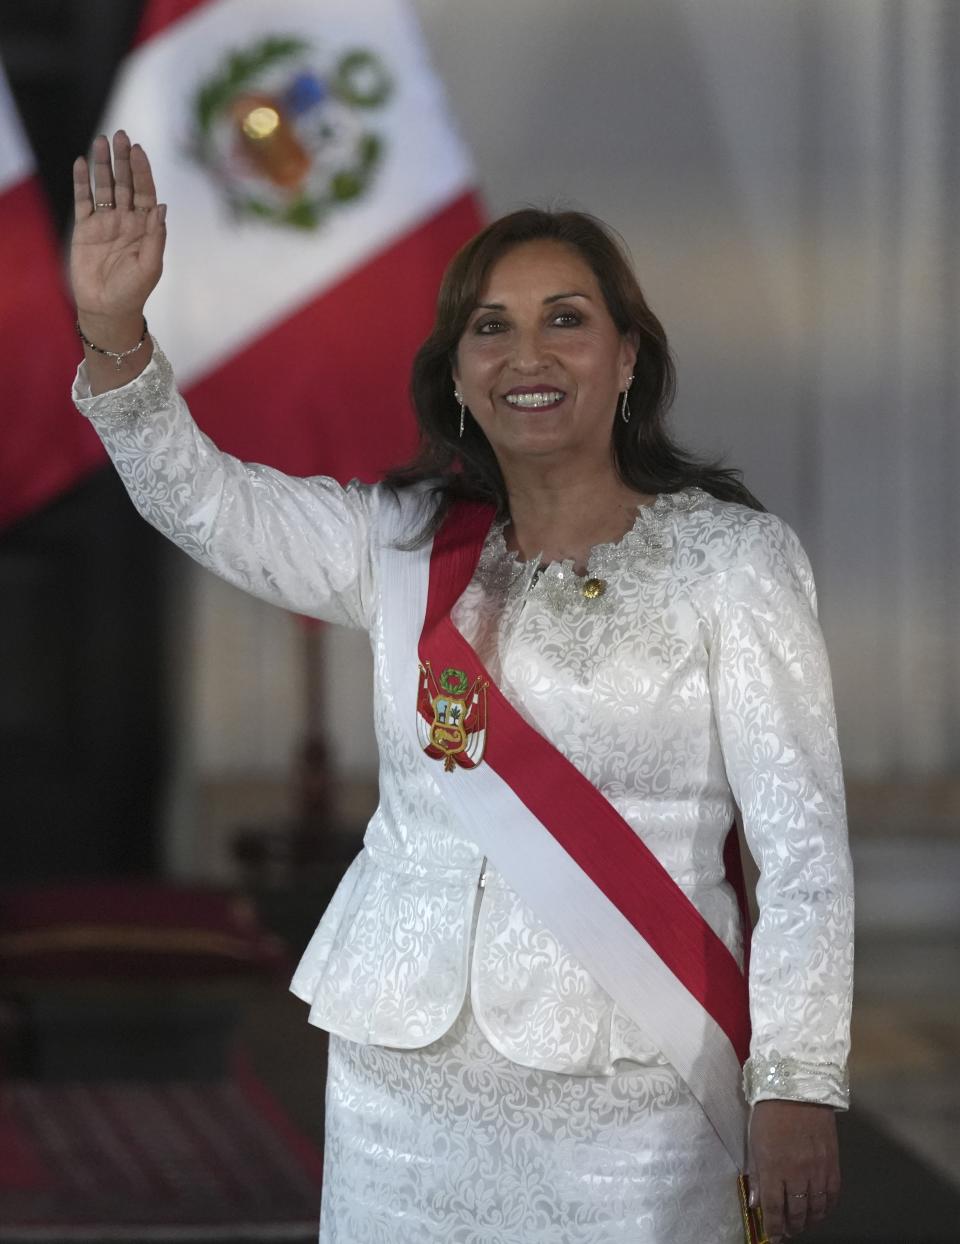 Peru's President Dina Boluarte waves as she arrives to swear in her cabinet members at the government palace in Lima, Peru, Saturday, Dec. 10, 2022. (AP Photo/Guadalupe Pardo)